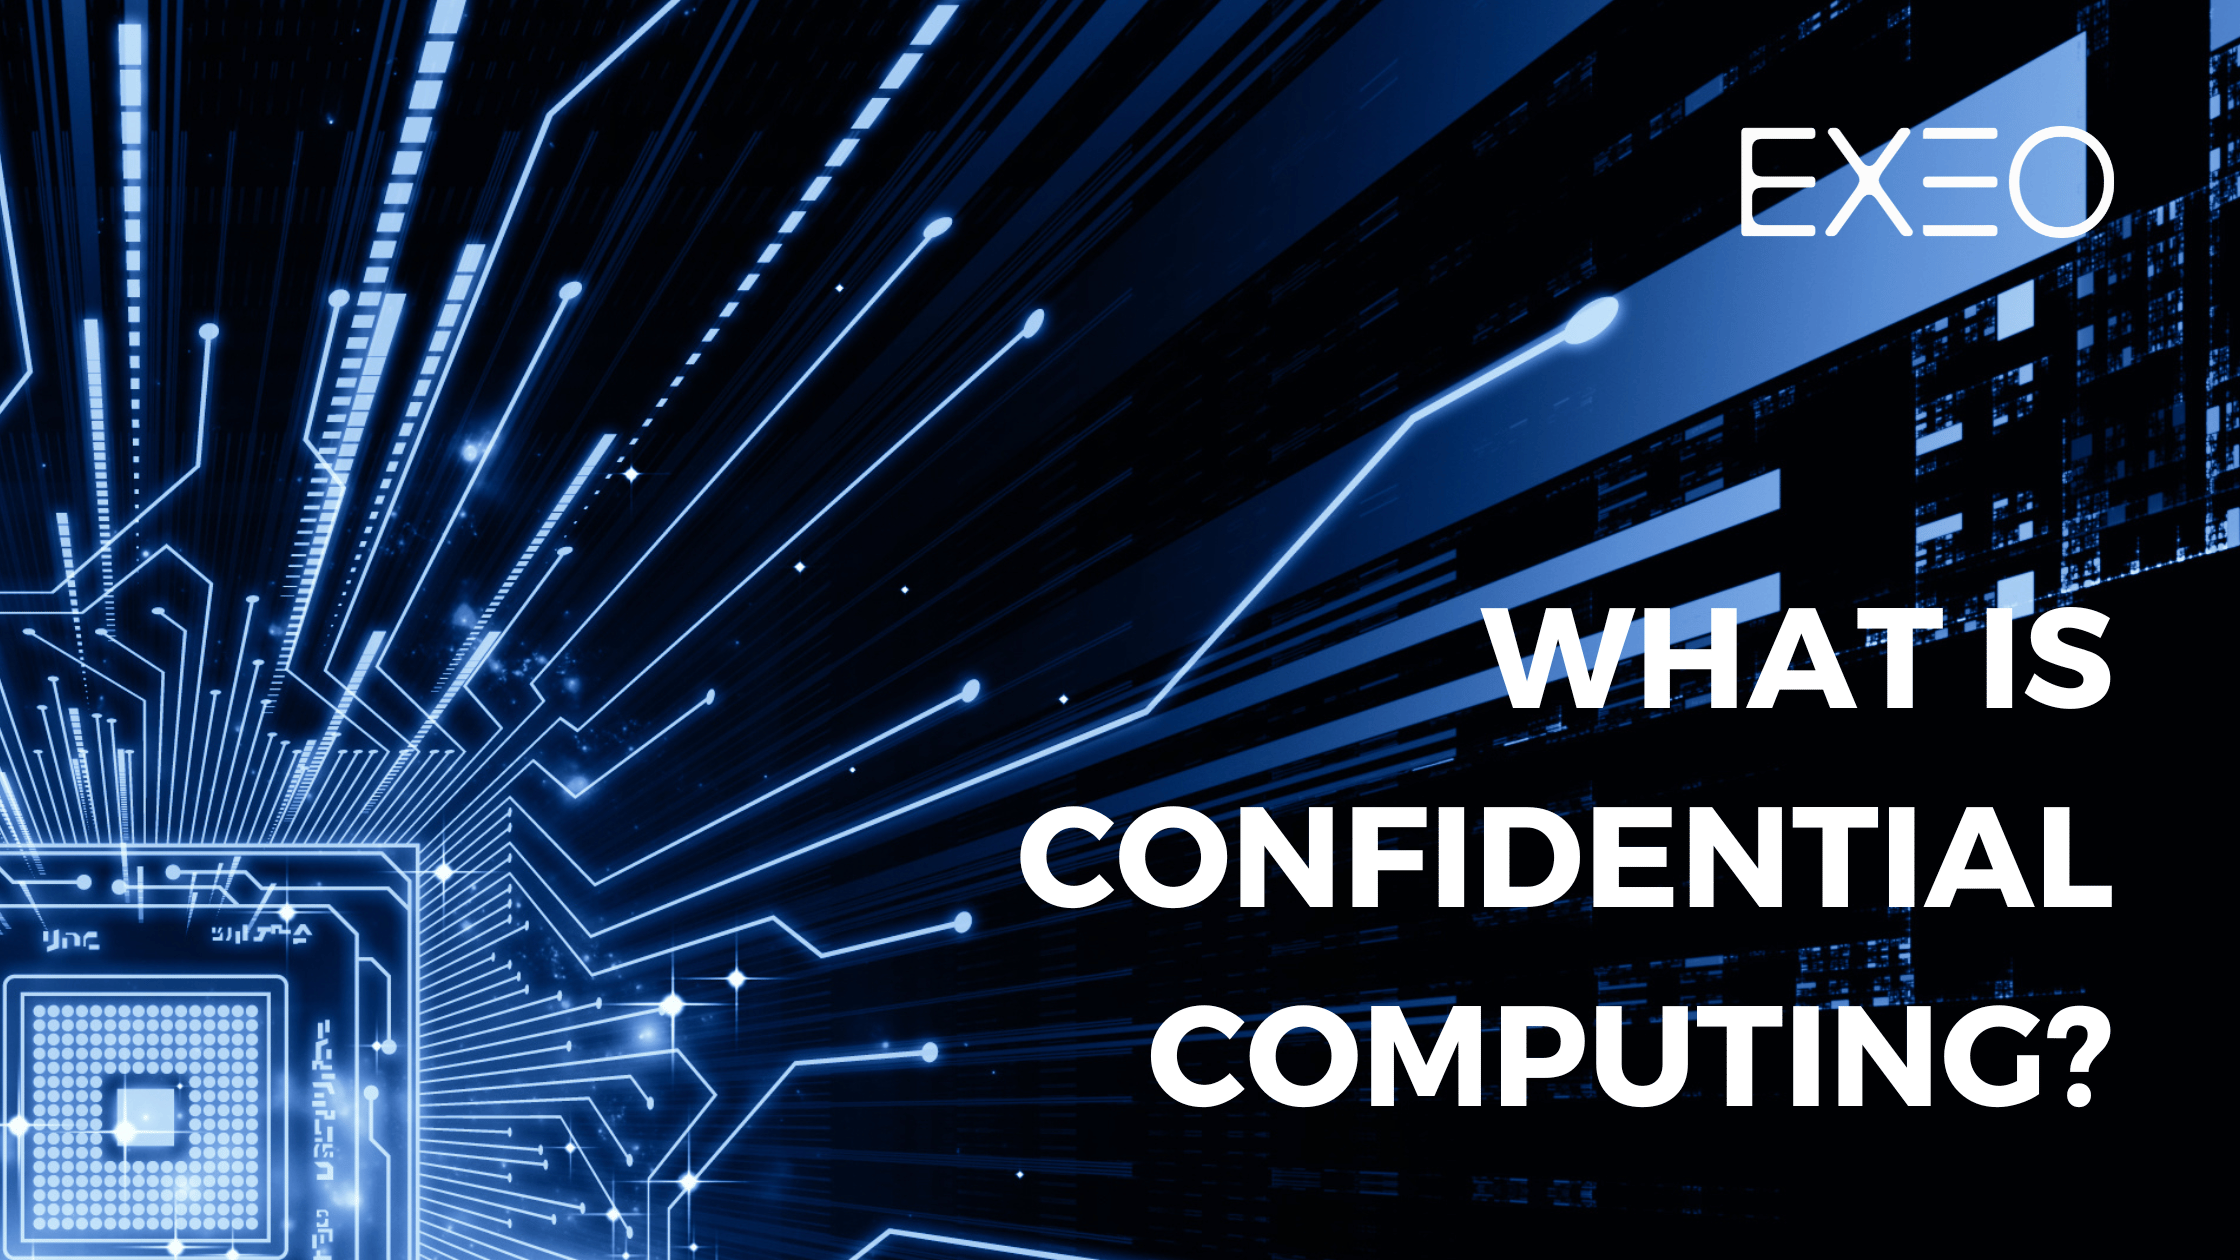 What is confidential computing?